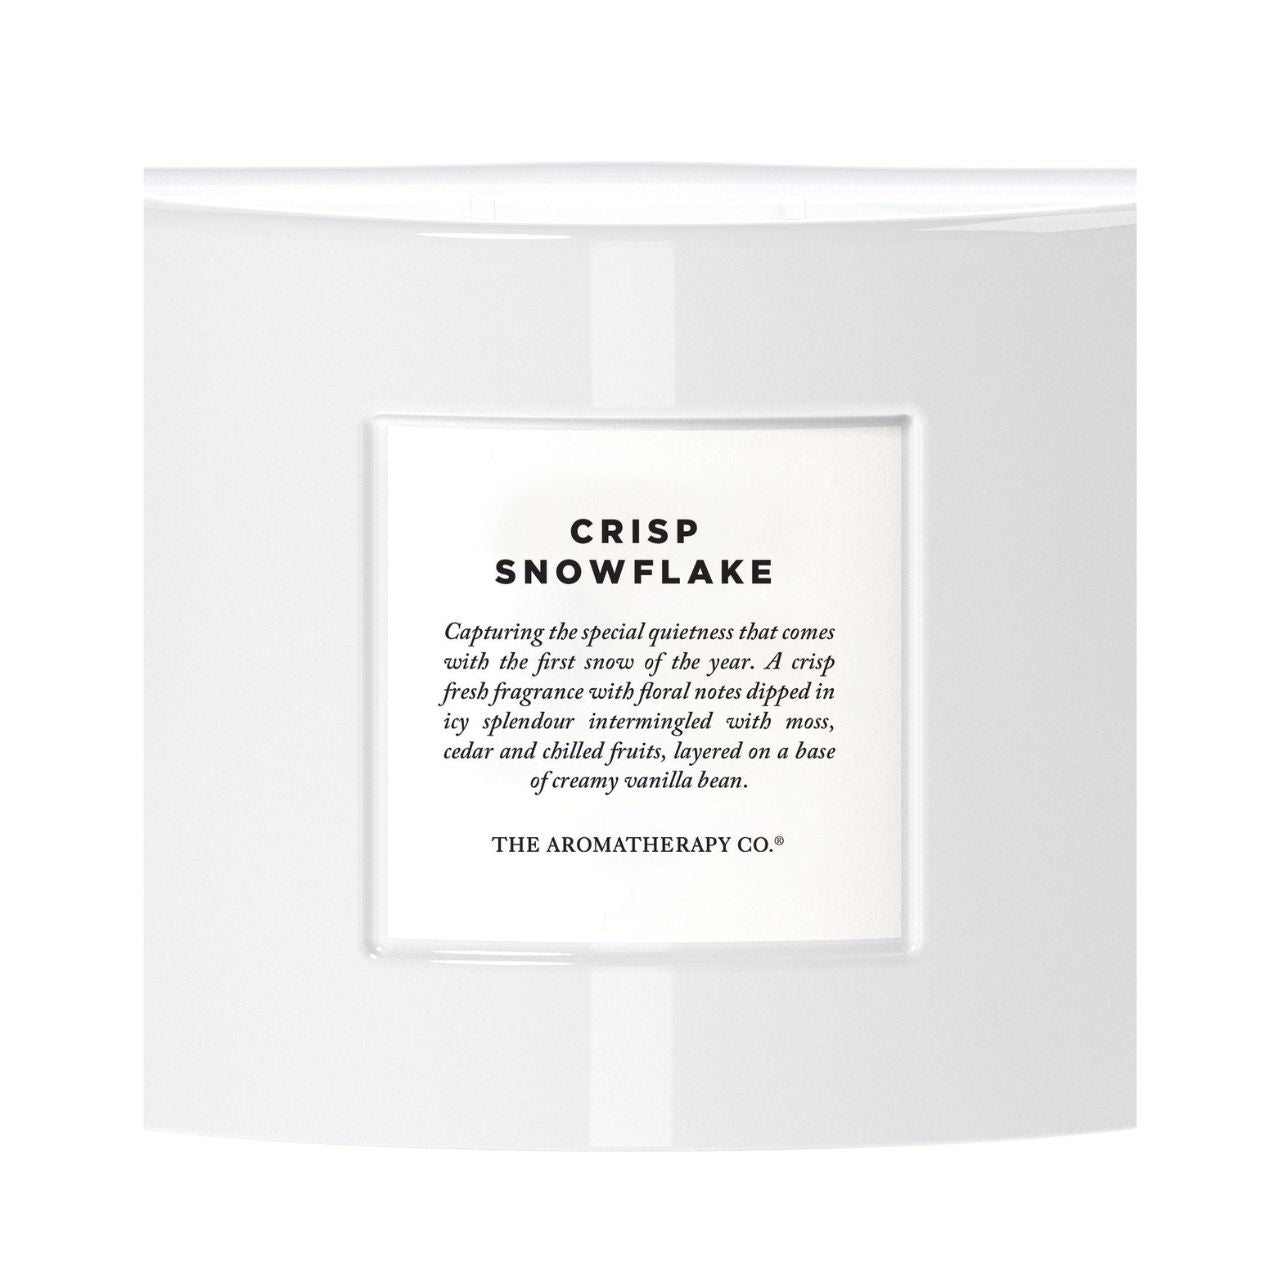 Christmas Blend 280gm Candle - Snowflake  A soy candle from THE AROMATHERAPY CO..  This new addition from the Blend range offers an array of sumptuous fragrances simultaneously.